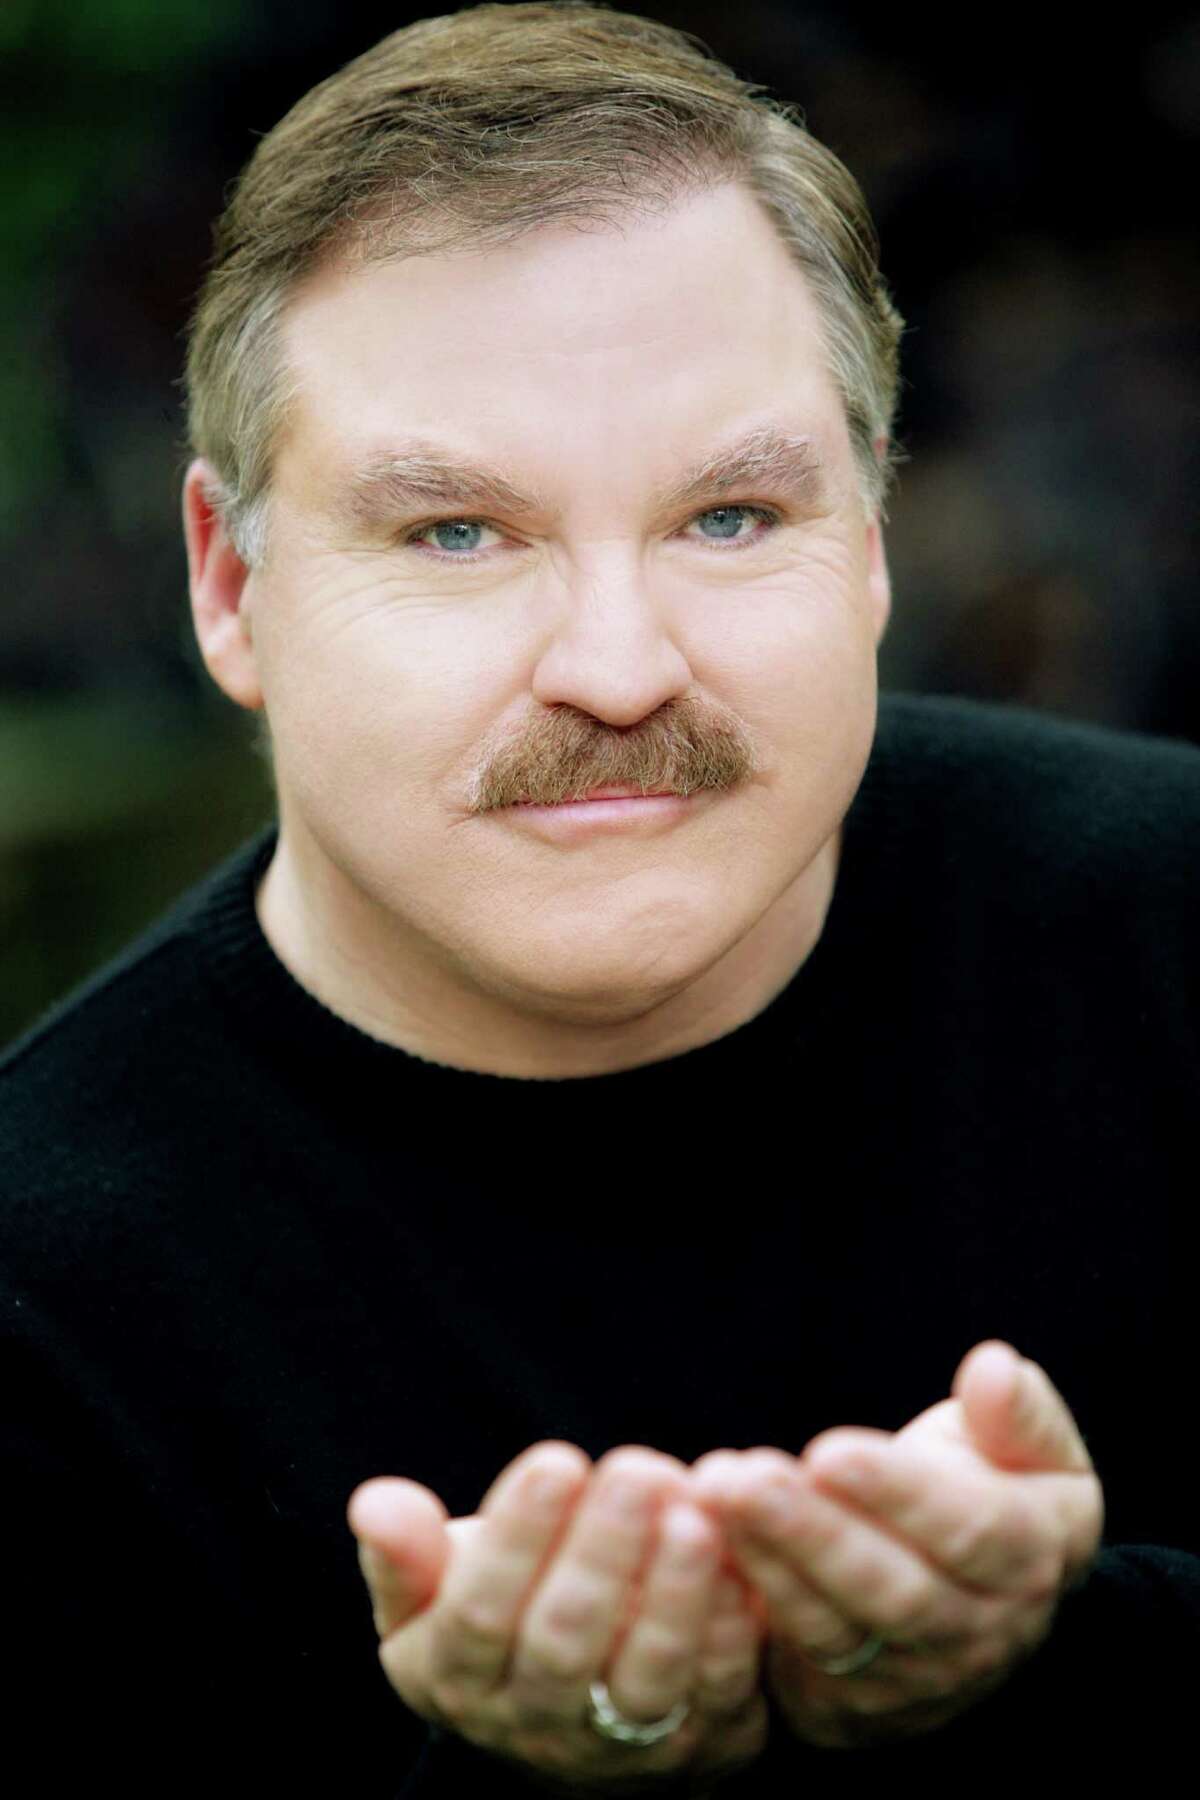 California-based medium James Van Praagh will be at the Ridgefield (Conn.) Playhouse, where he has appeared several previous times, on Wednesday, April 9, 2014. It is one of about 50 shows he will do this year. For information on tickets, visit www.ridgefieldplayhouse.org or call 203-438-5795.